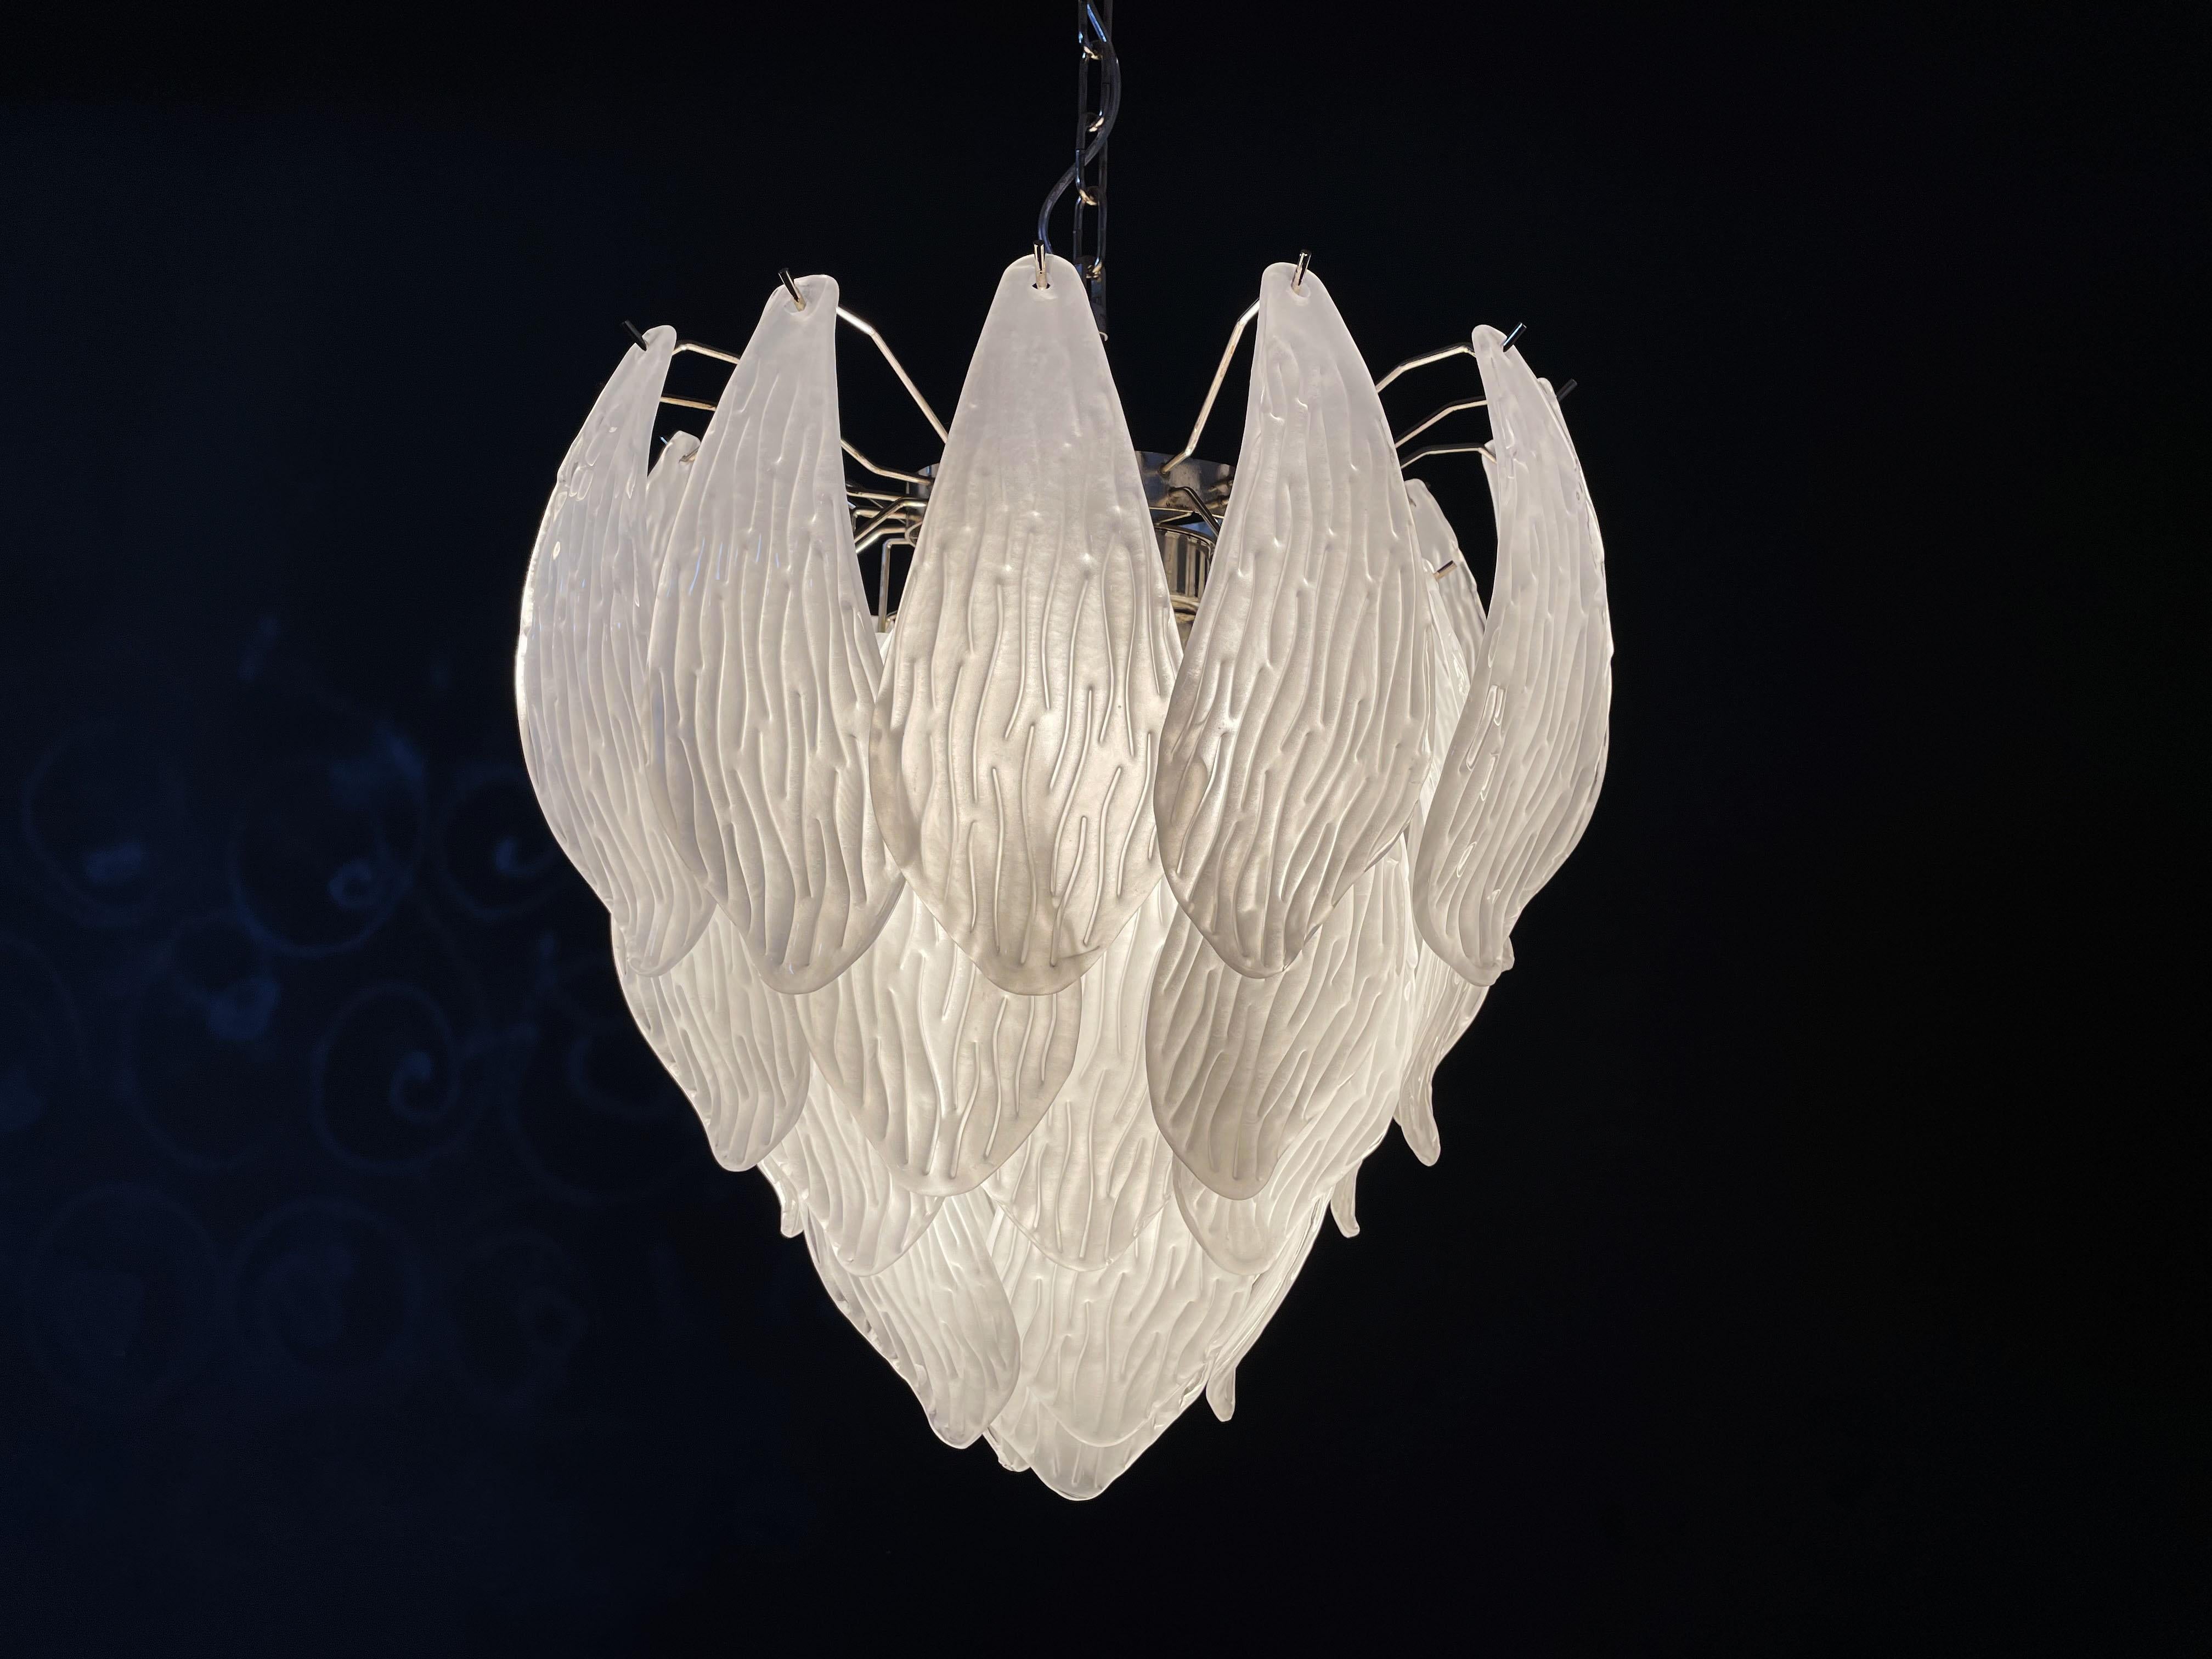 Huge Italian vintage Murano chandelier made by 41 handblown transparent frosted carved glass leaves in a chrome frame.
Period: late XX century
Dimensions:	49,20 inches  (125 cm) height with chain; 25,80 inches  (68 cm) height without chain; 21,25